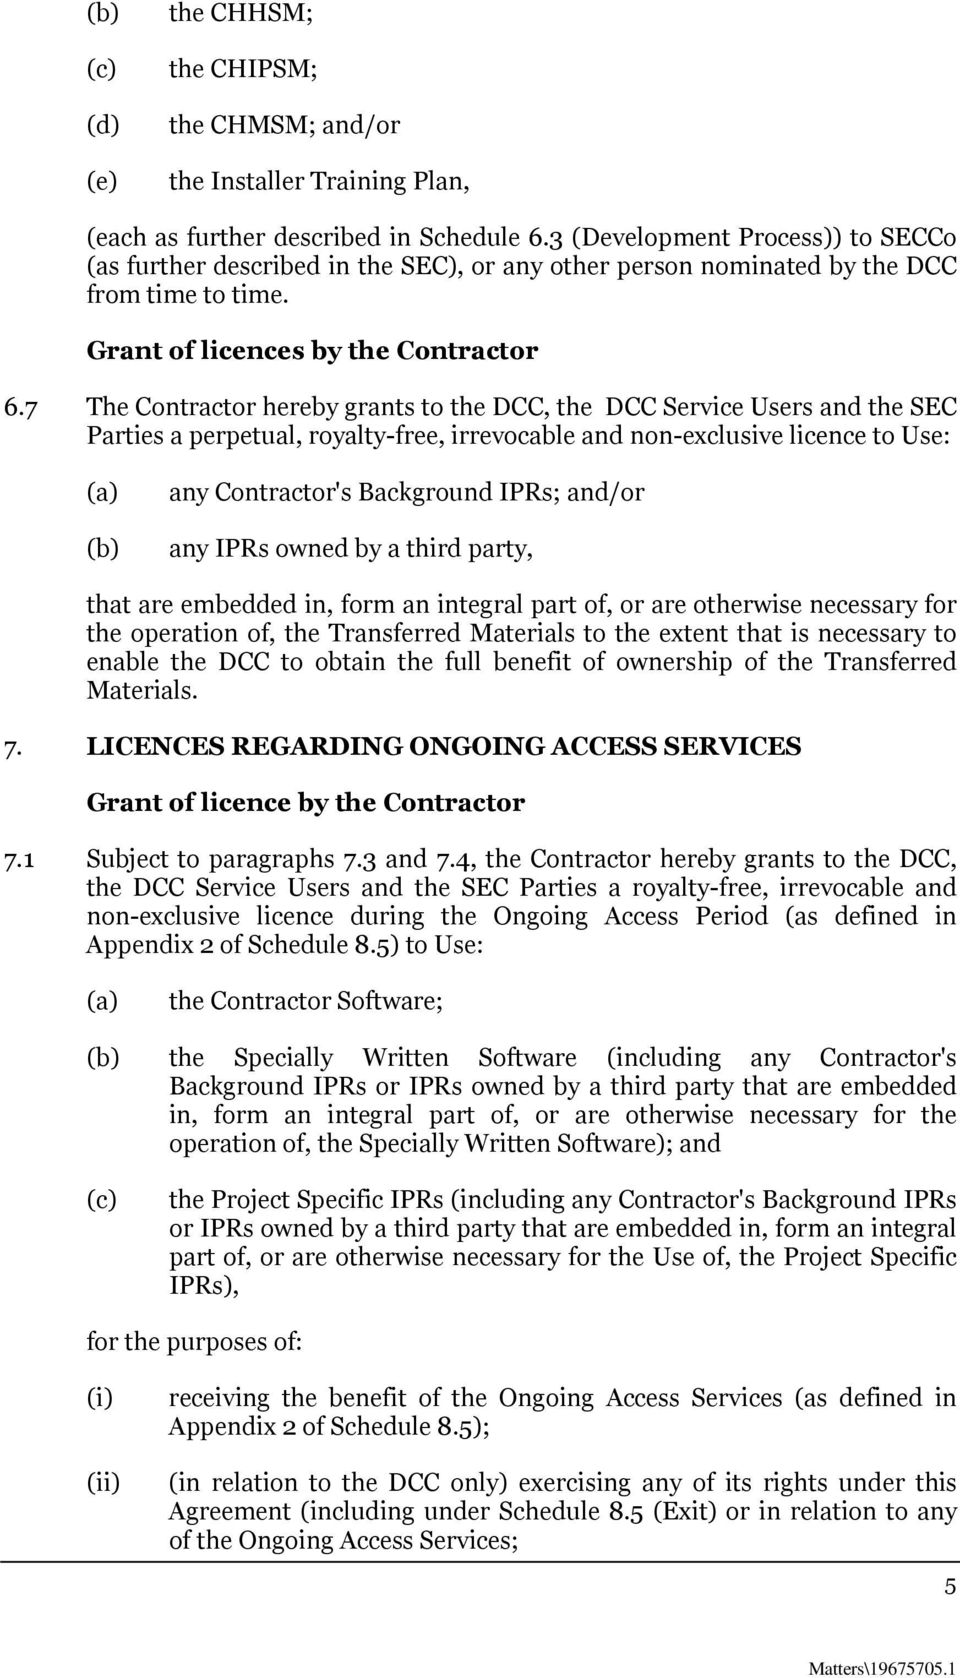 7 The Contractor hereby grants to the DCC, the DCC Service Users and the SEC Parties a perpetual, royalty-free, irrevocable and non-exclusive licence to Use: any Contractor's Background IPRs; and/or